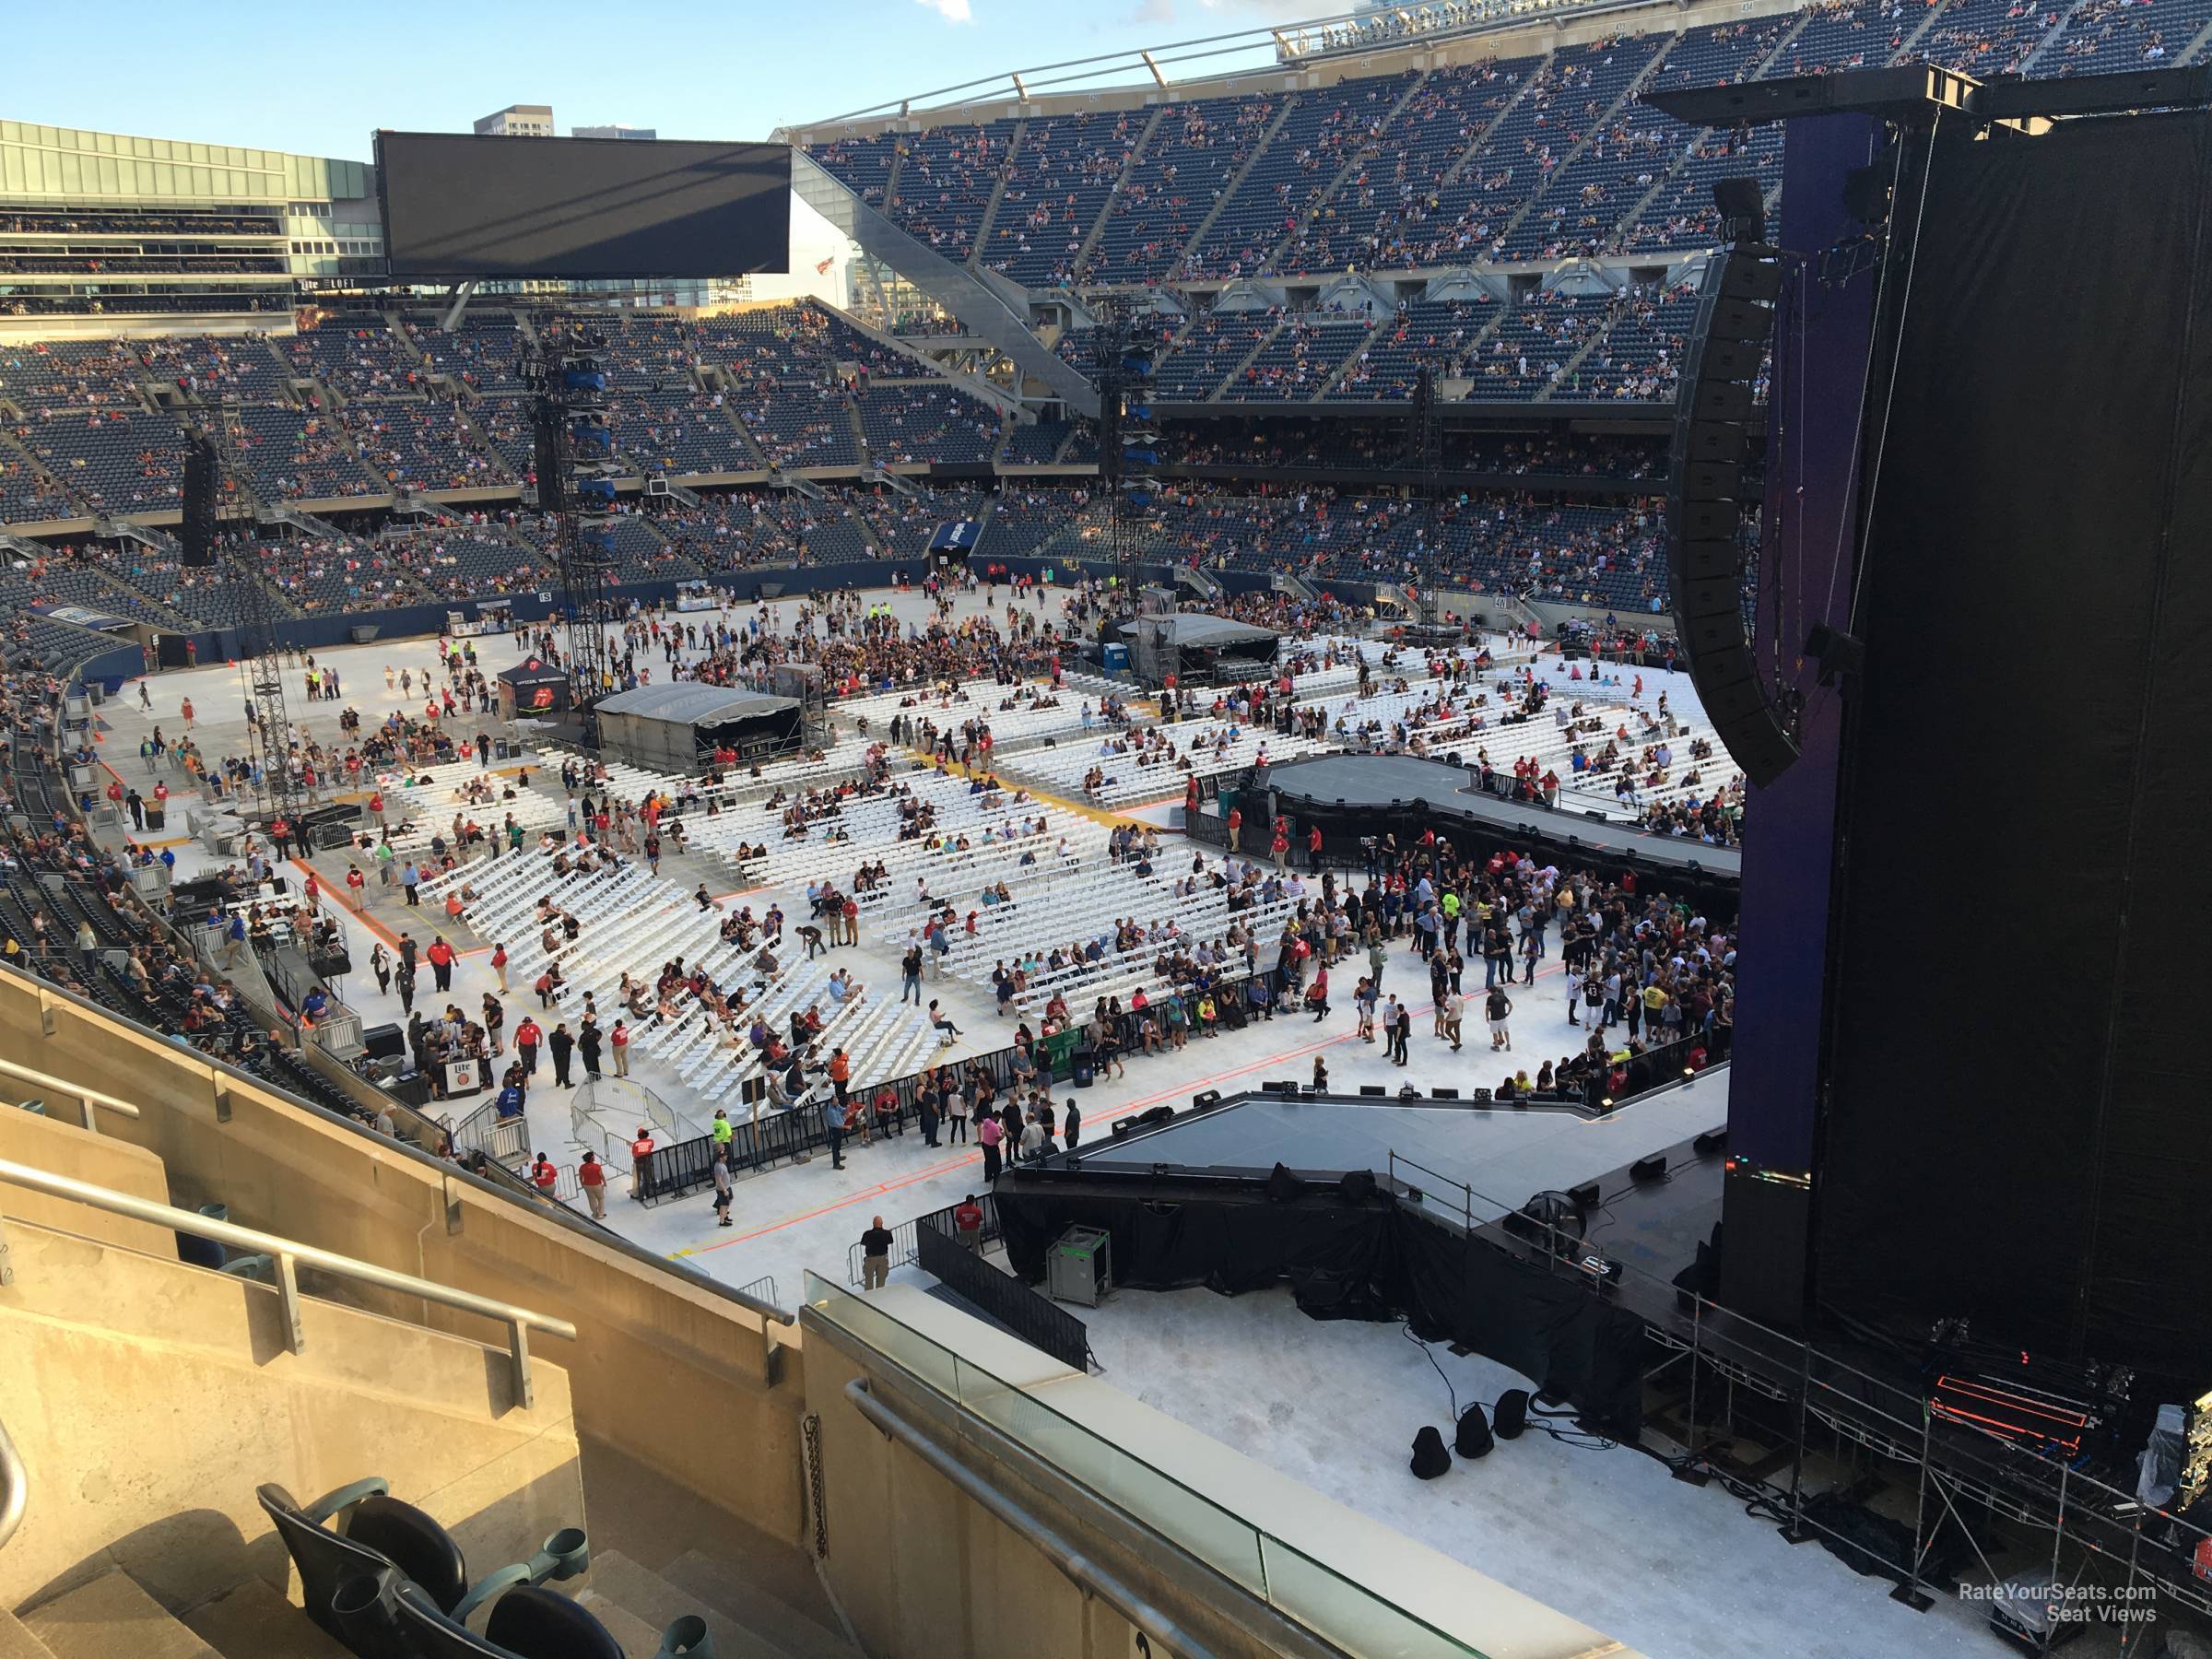 section 302, row 5 seat view  for concert - soldier field